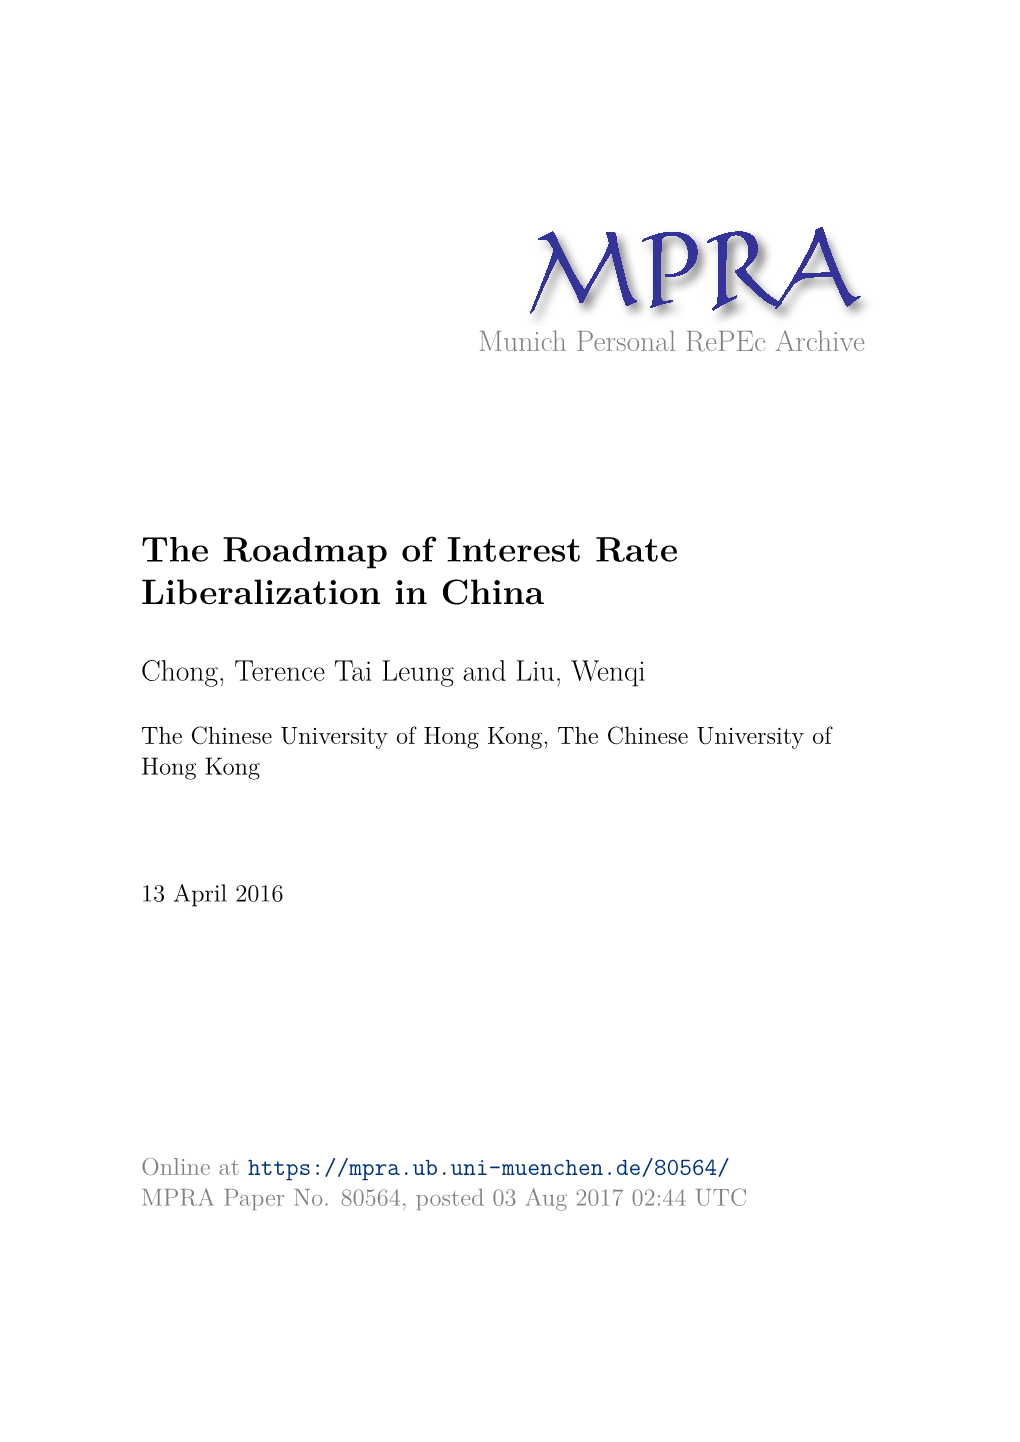 The Roadmap of Interest Rate Liberalization in China